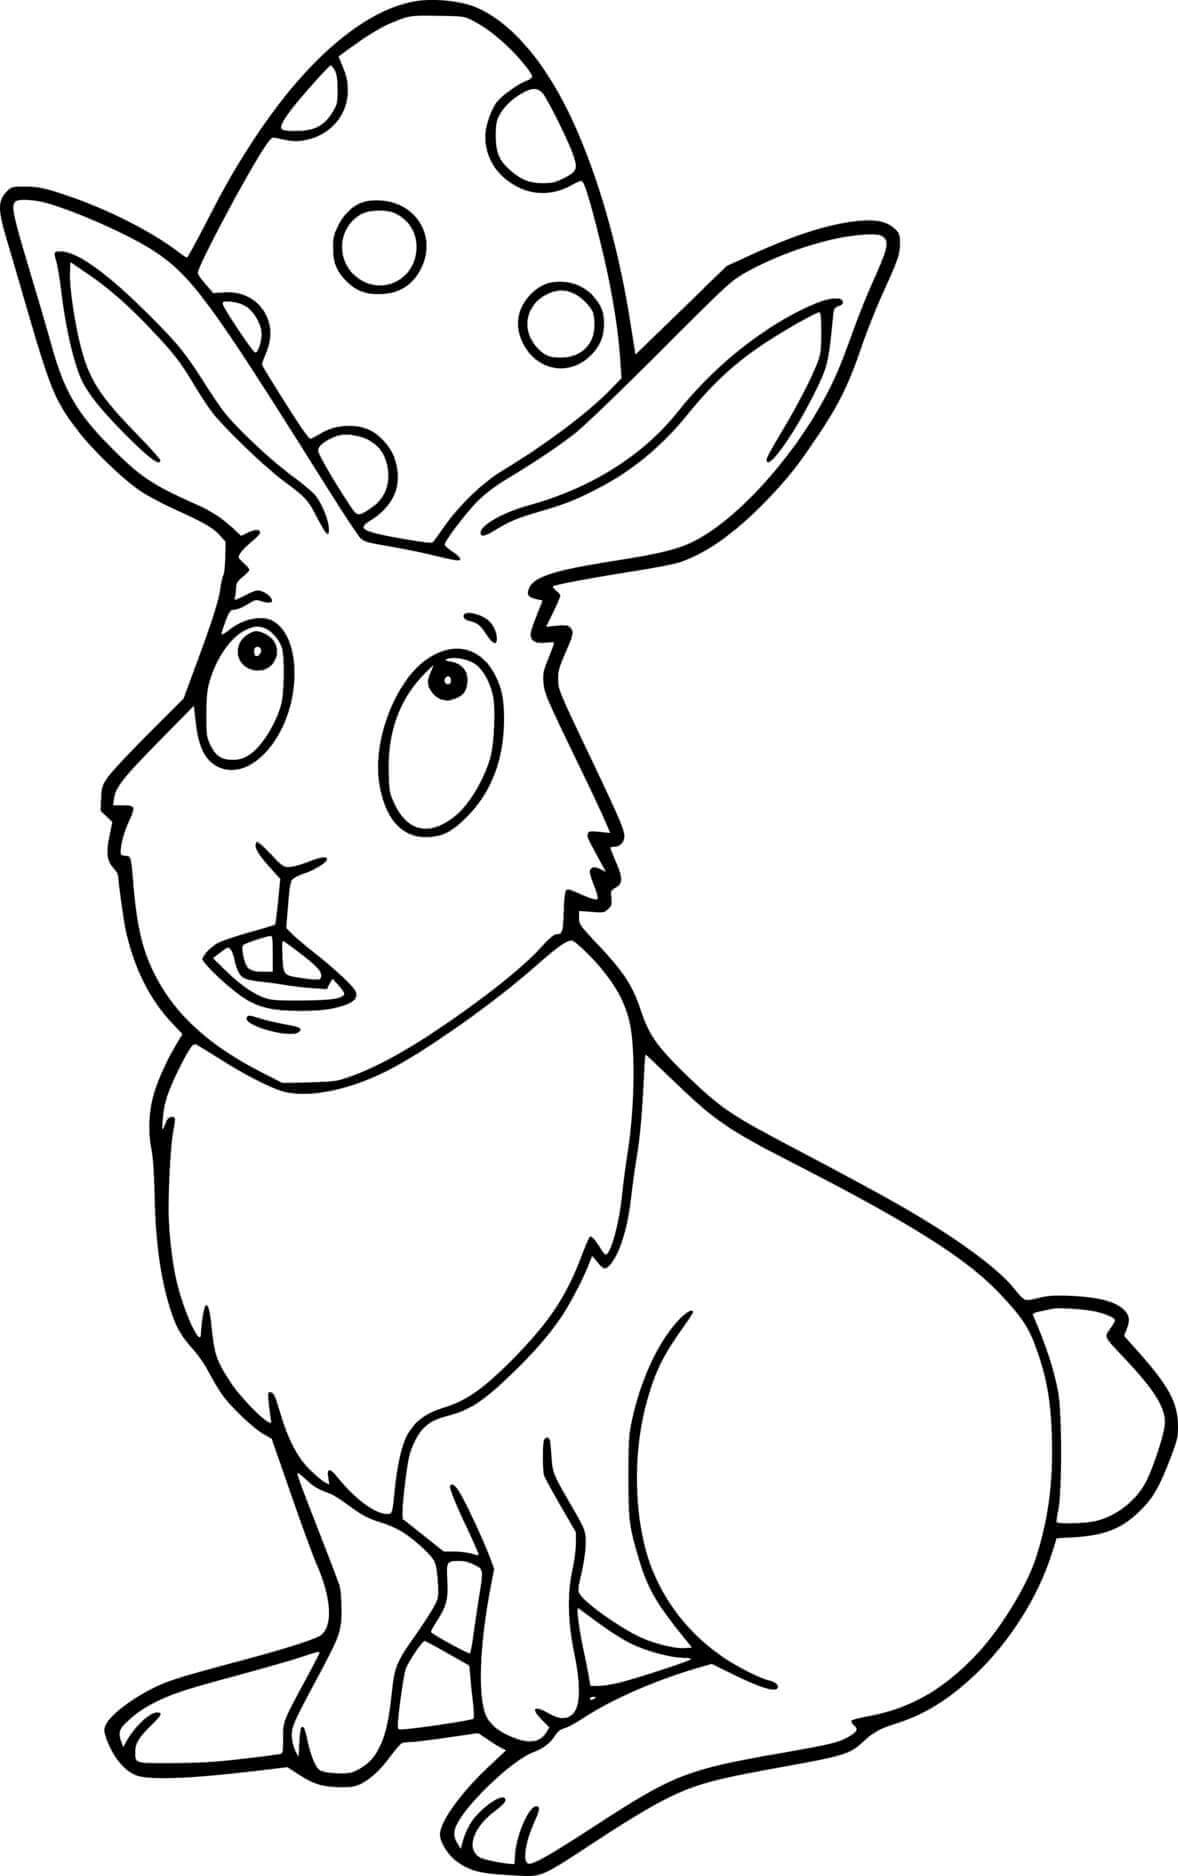 An Egg On The Easter Bunnys Head Coloring Page